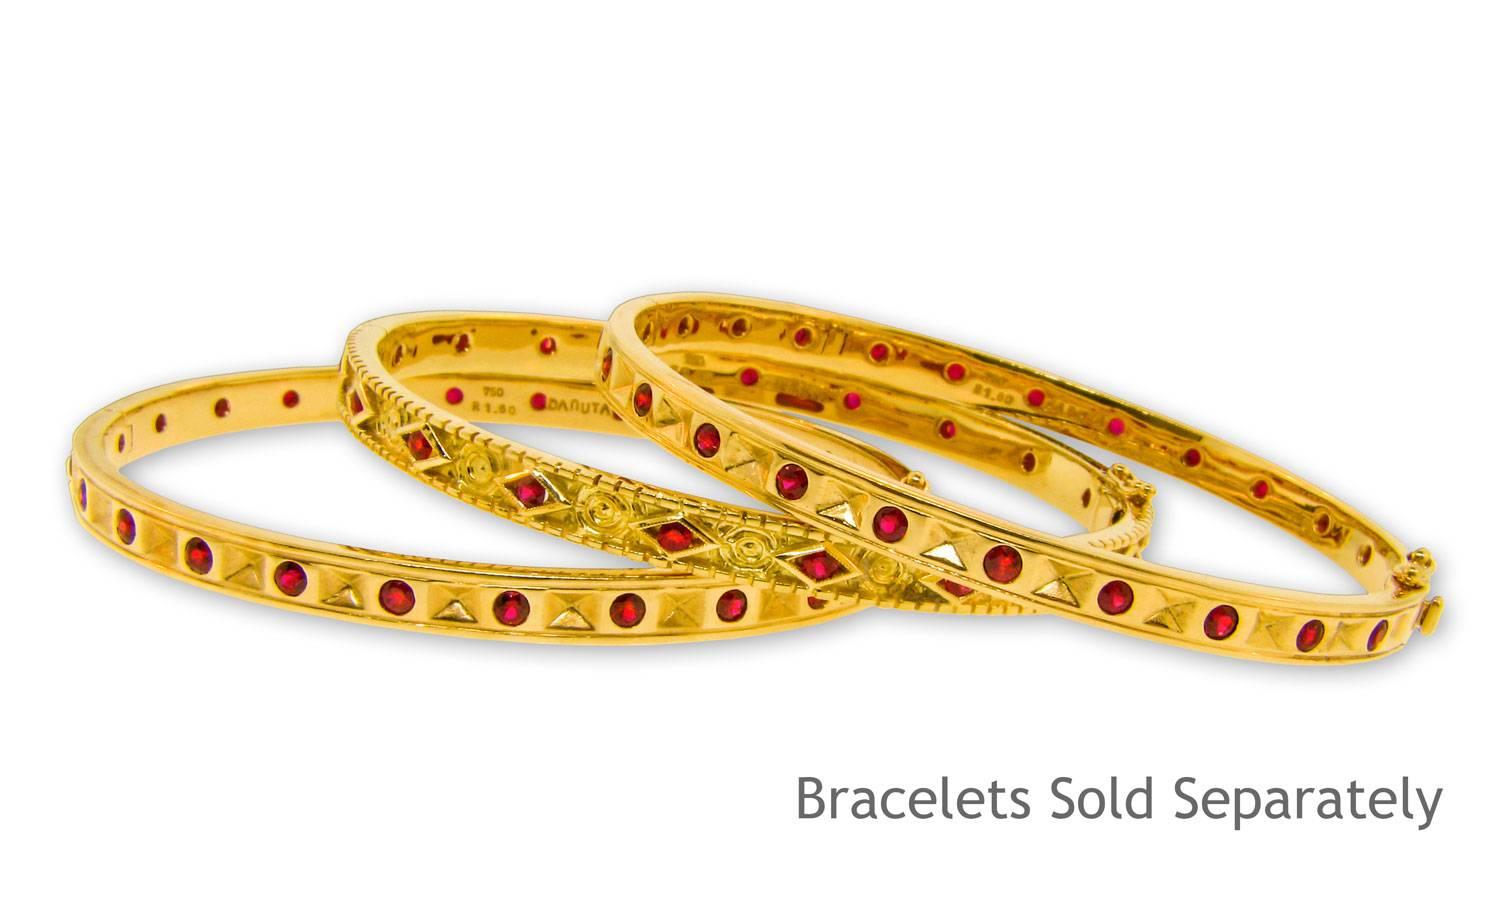 .95 Carat Ruby Yellow Gold Celtic Carving Design Bangle Bracelet In New Condition For Sale In Santa Fe, NM